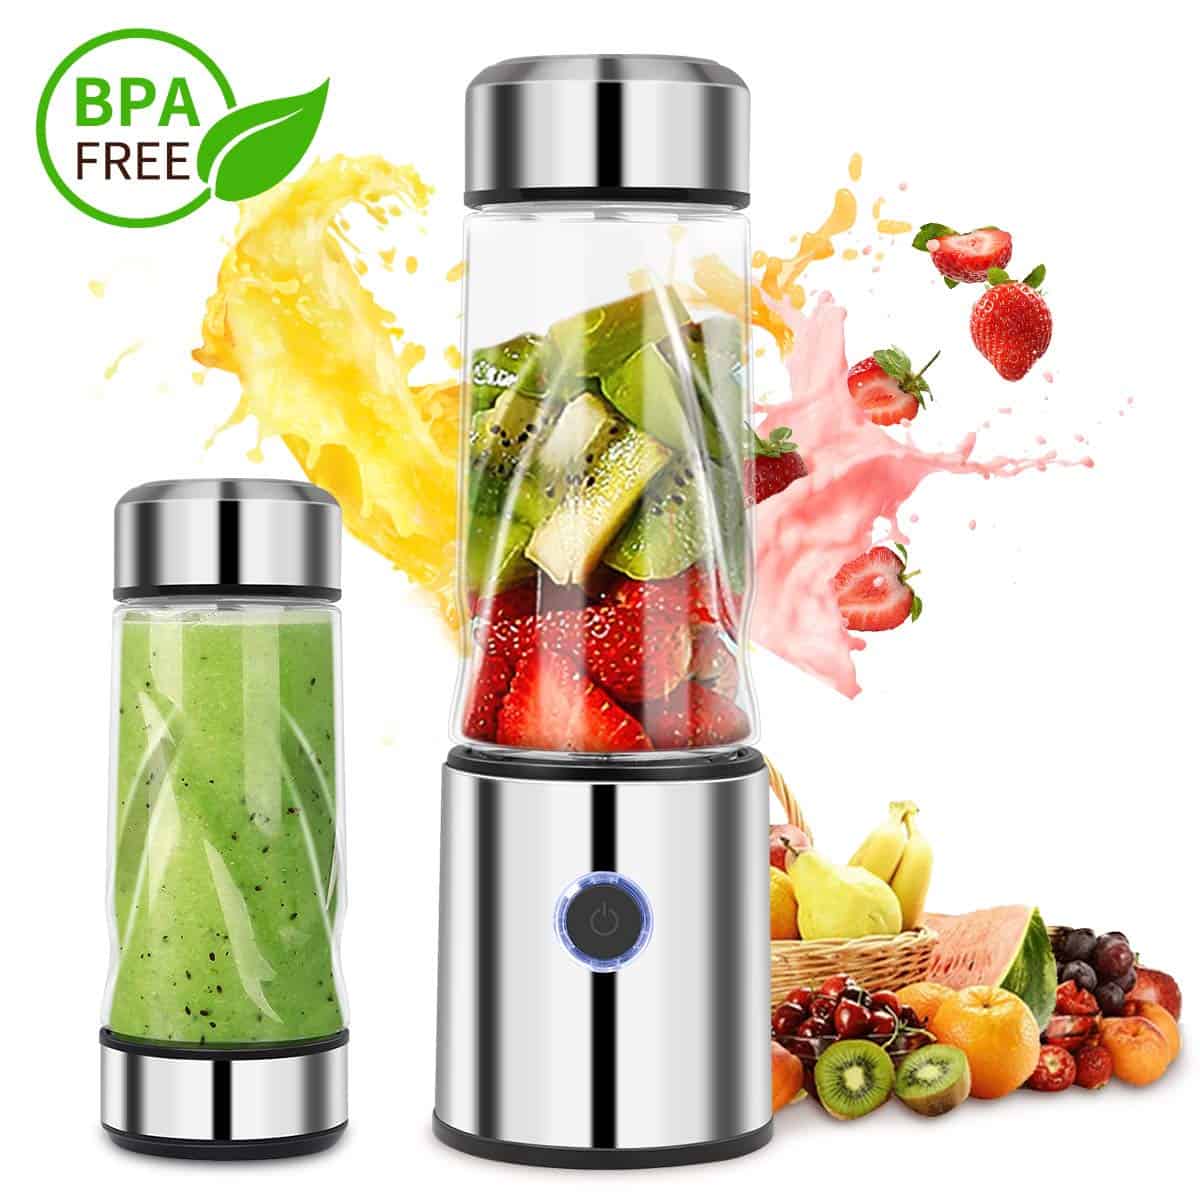 The iFedio Personal Portable Blender is pictured alongside stylized fruit